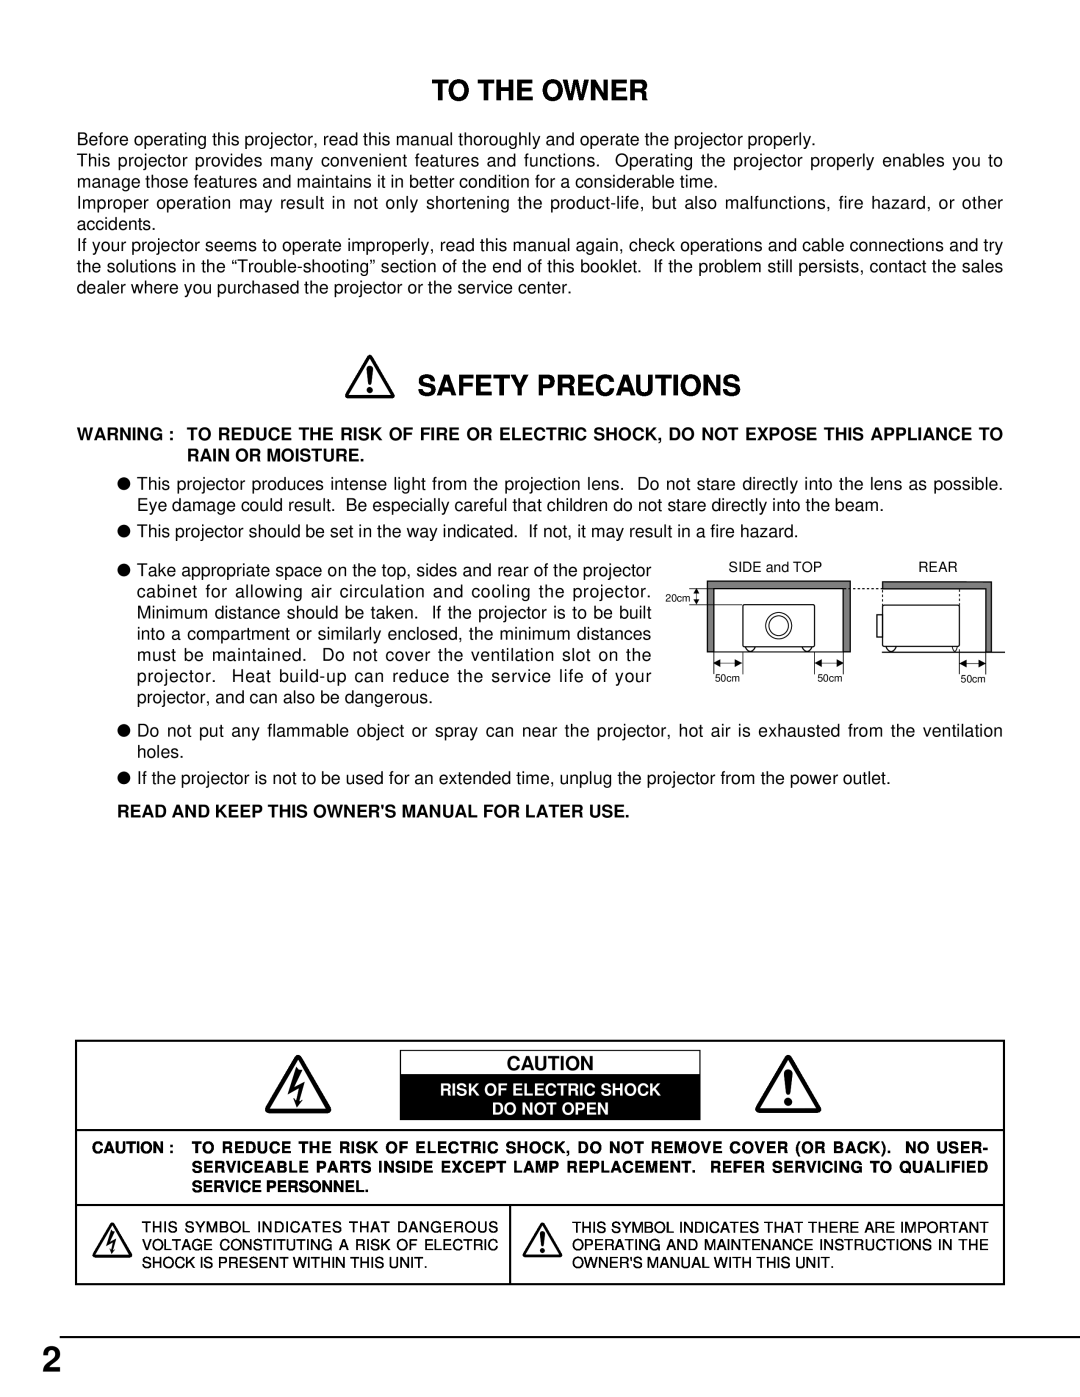 Canon 5100 owner manual To The Owner, Safety Precautions 